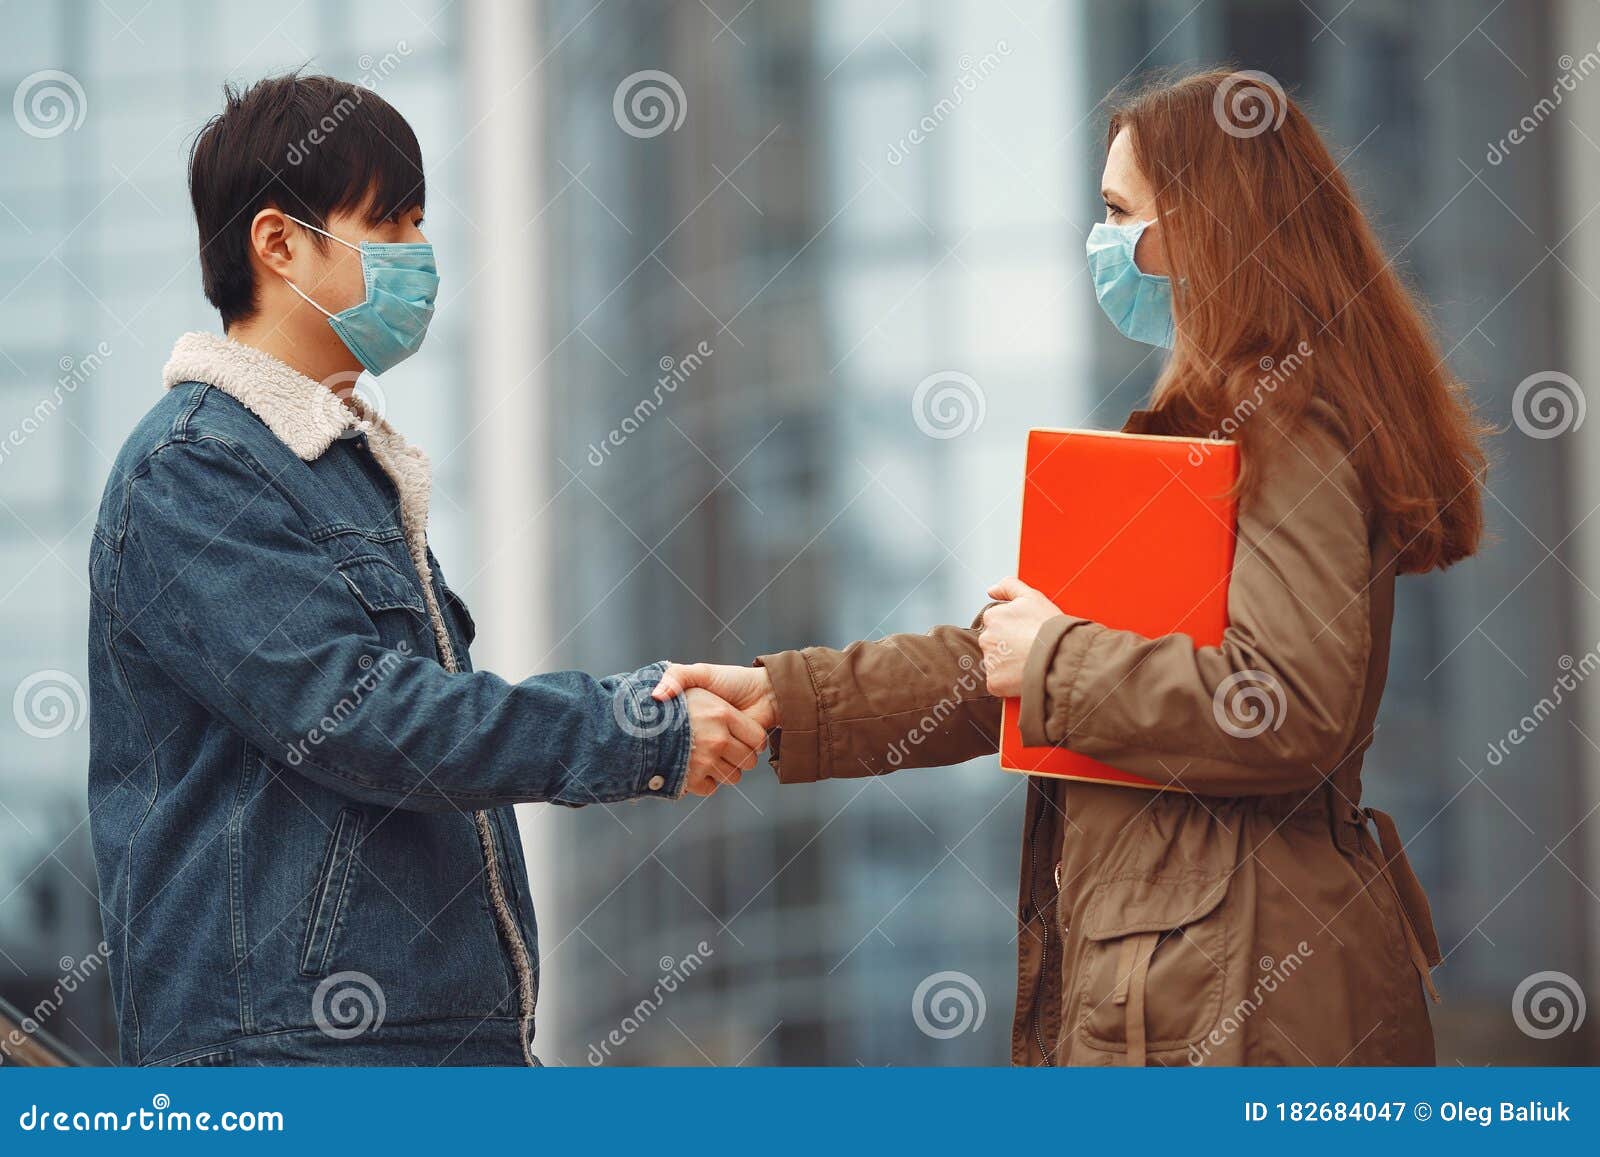 chinese man and a woman in disposable masks are shaking hands